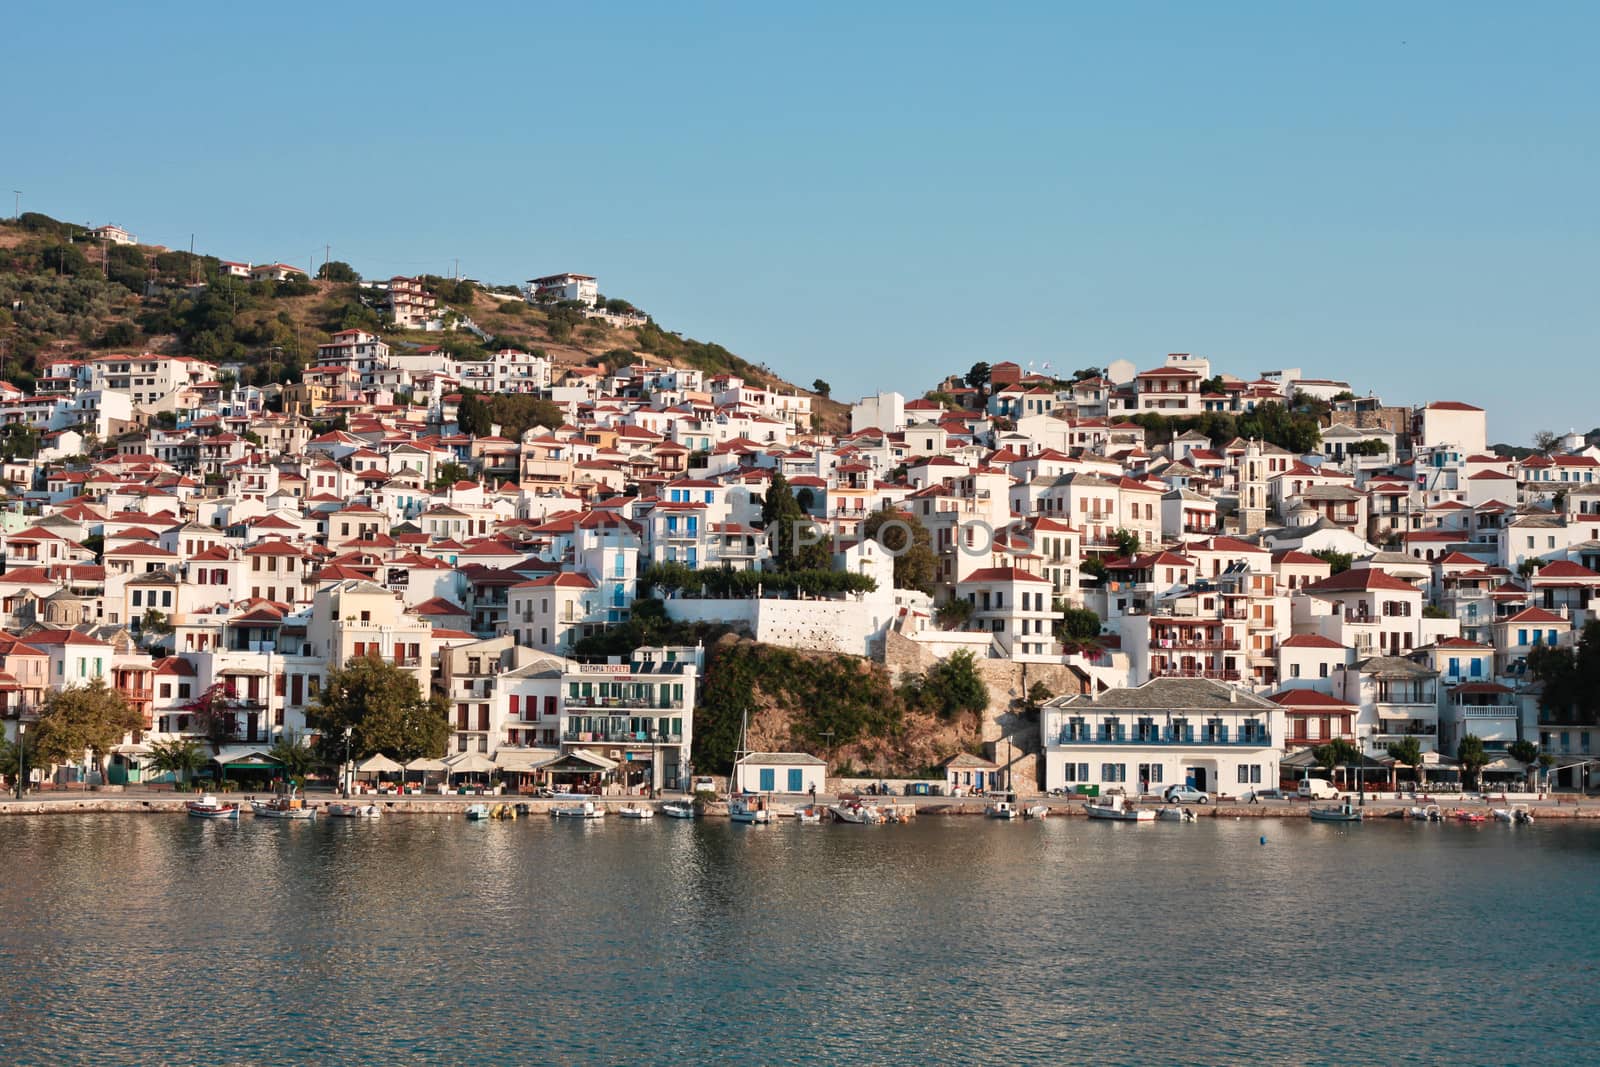 Old town of Skopelos in the early morning light